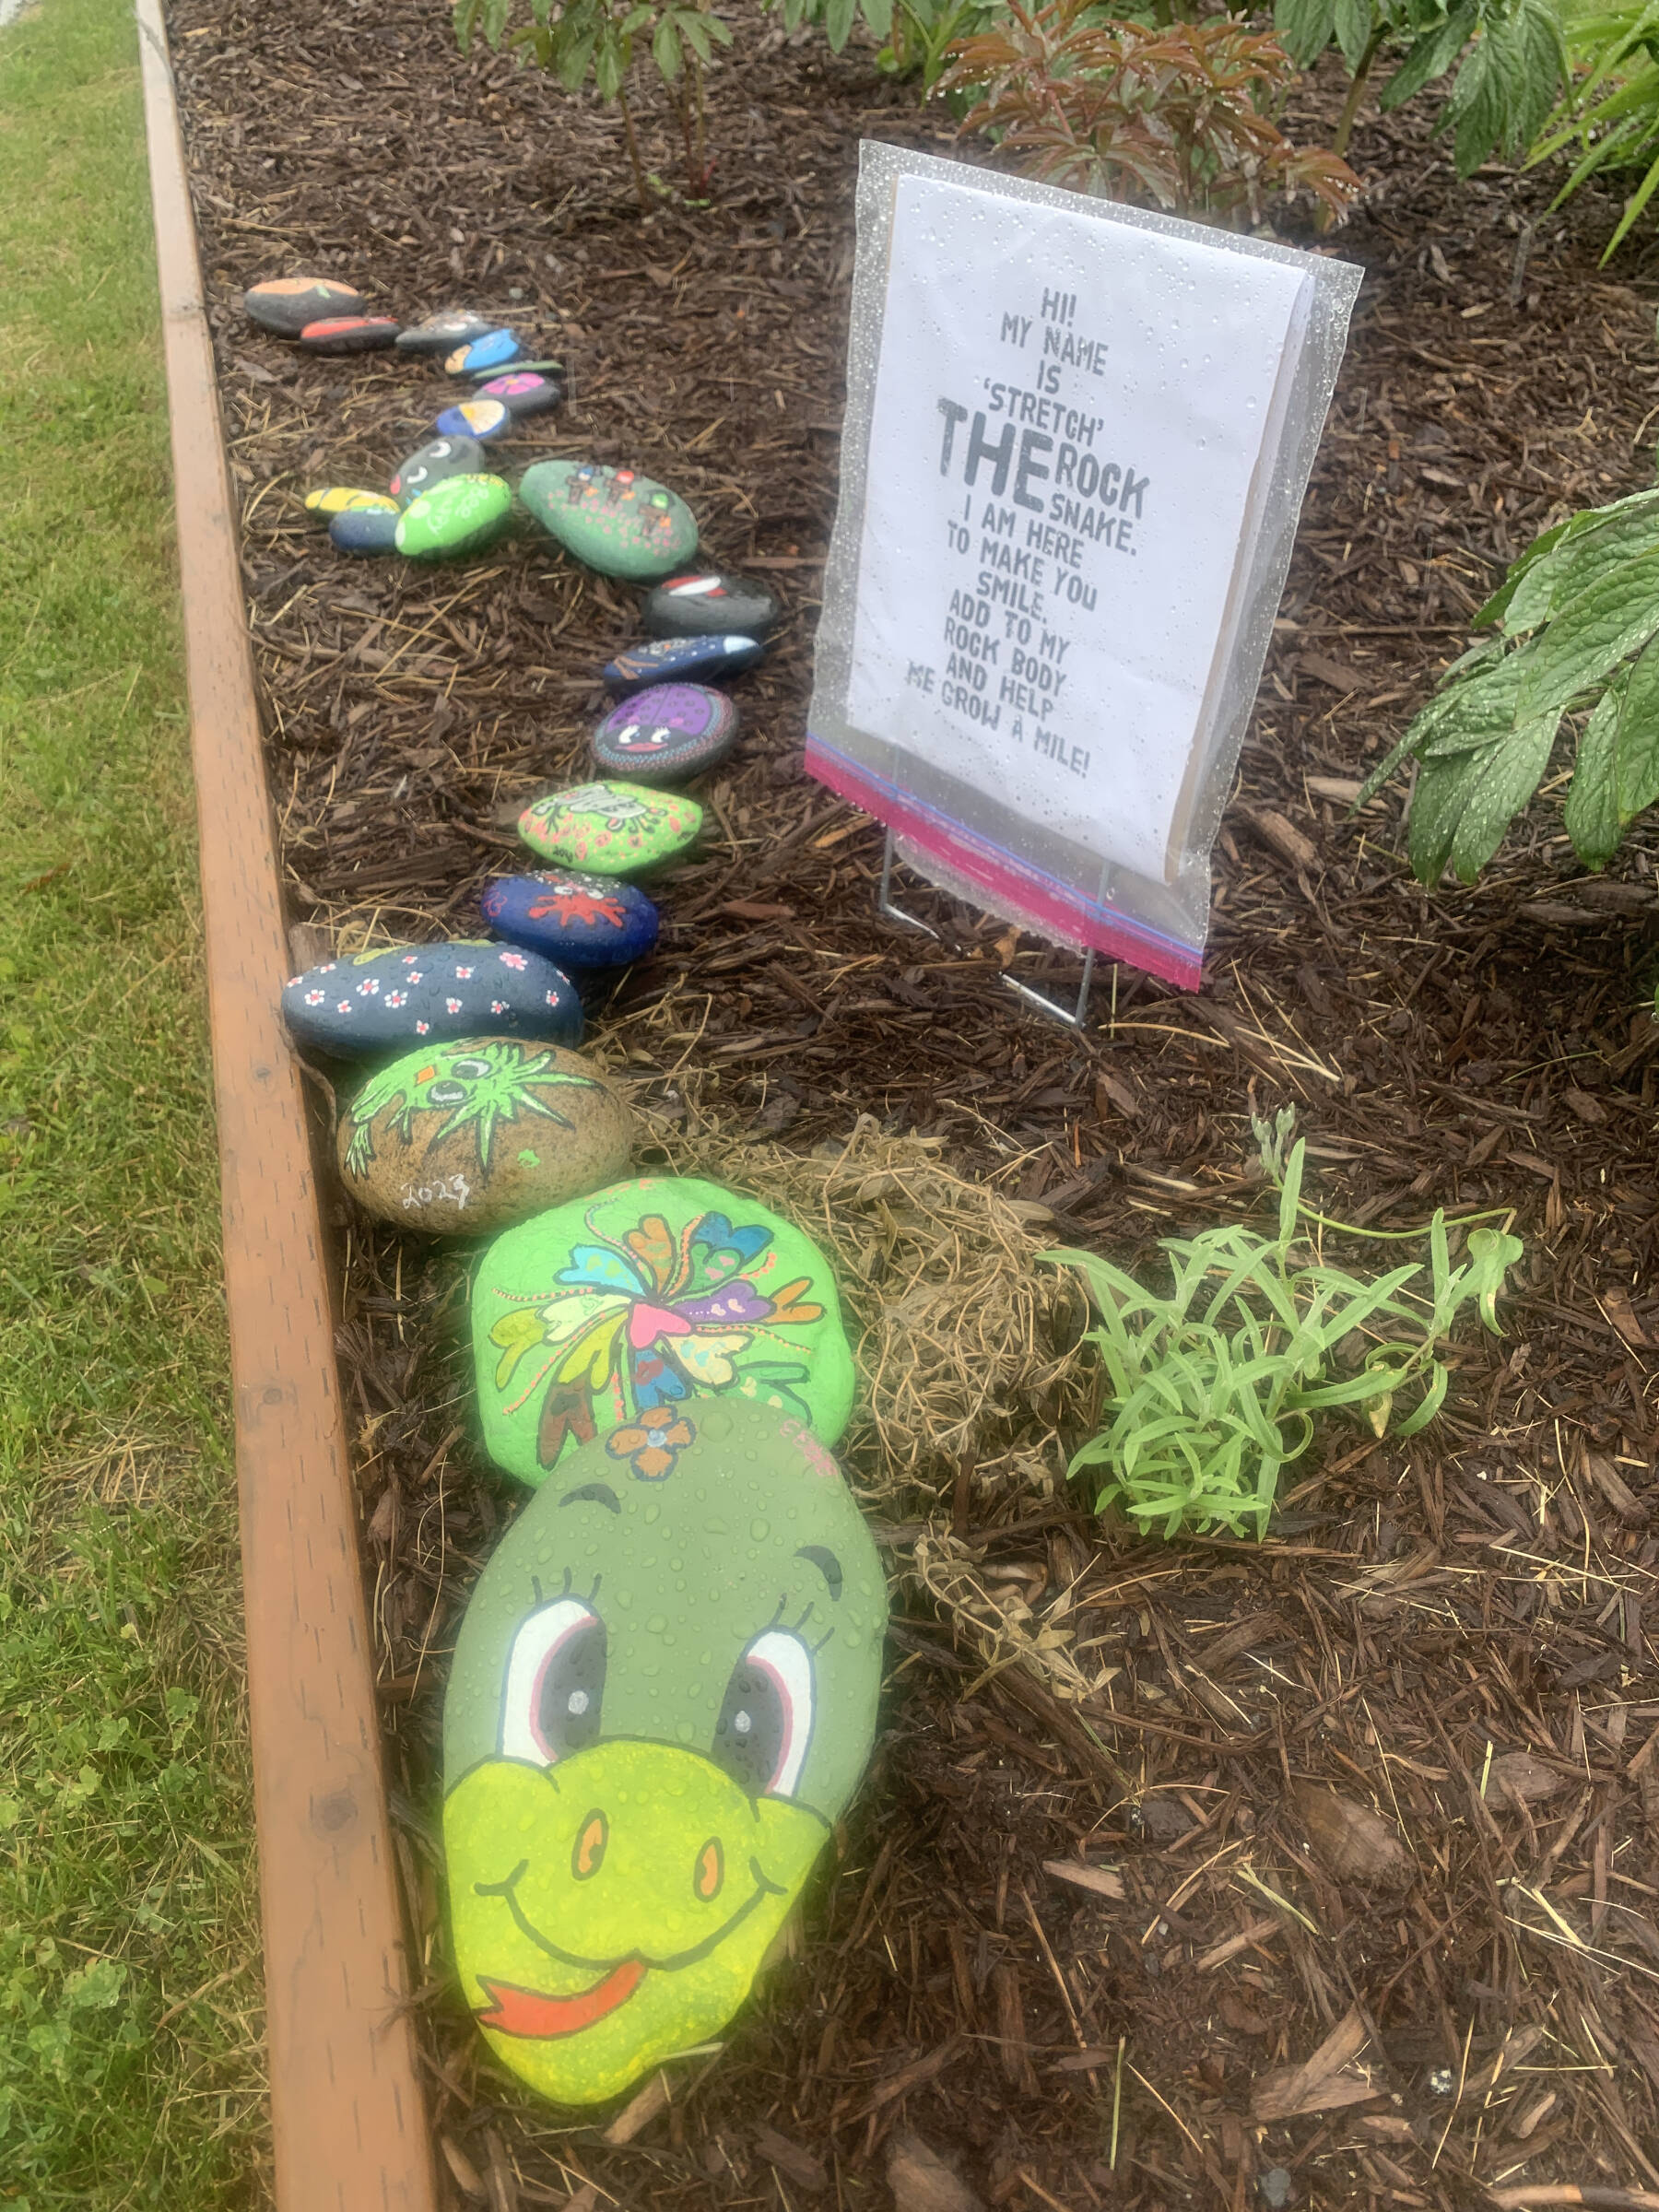 “Stretch” the painted rock snake, created by an anonymous community member, greets visitors to WKFL Park on Thursday, June 22, 2023 in the hopes of more rocks being added all summer long in Homer, Alaska. Photo by Christina Whiting